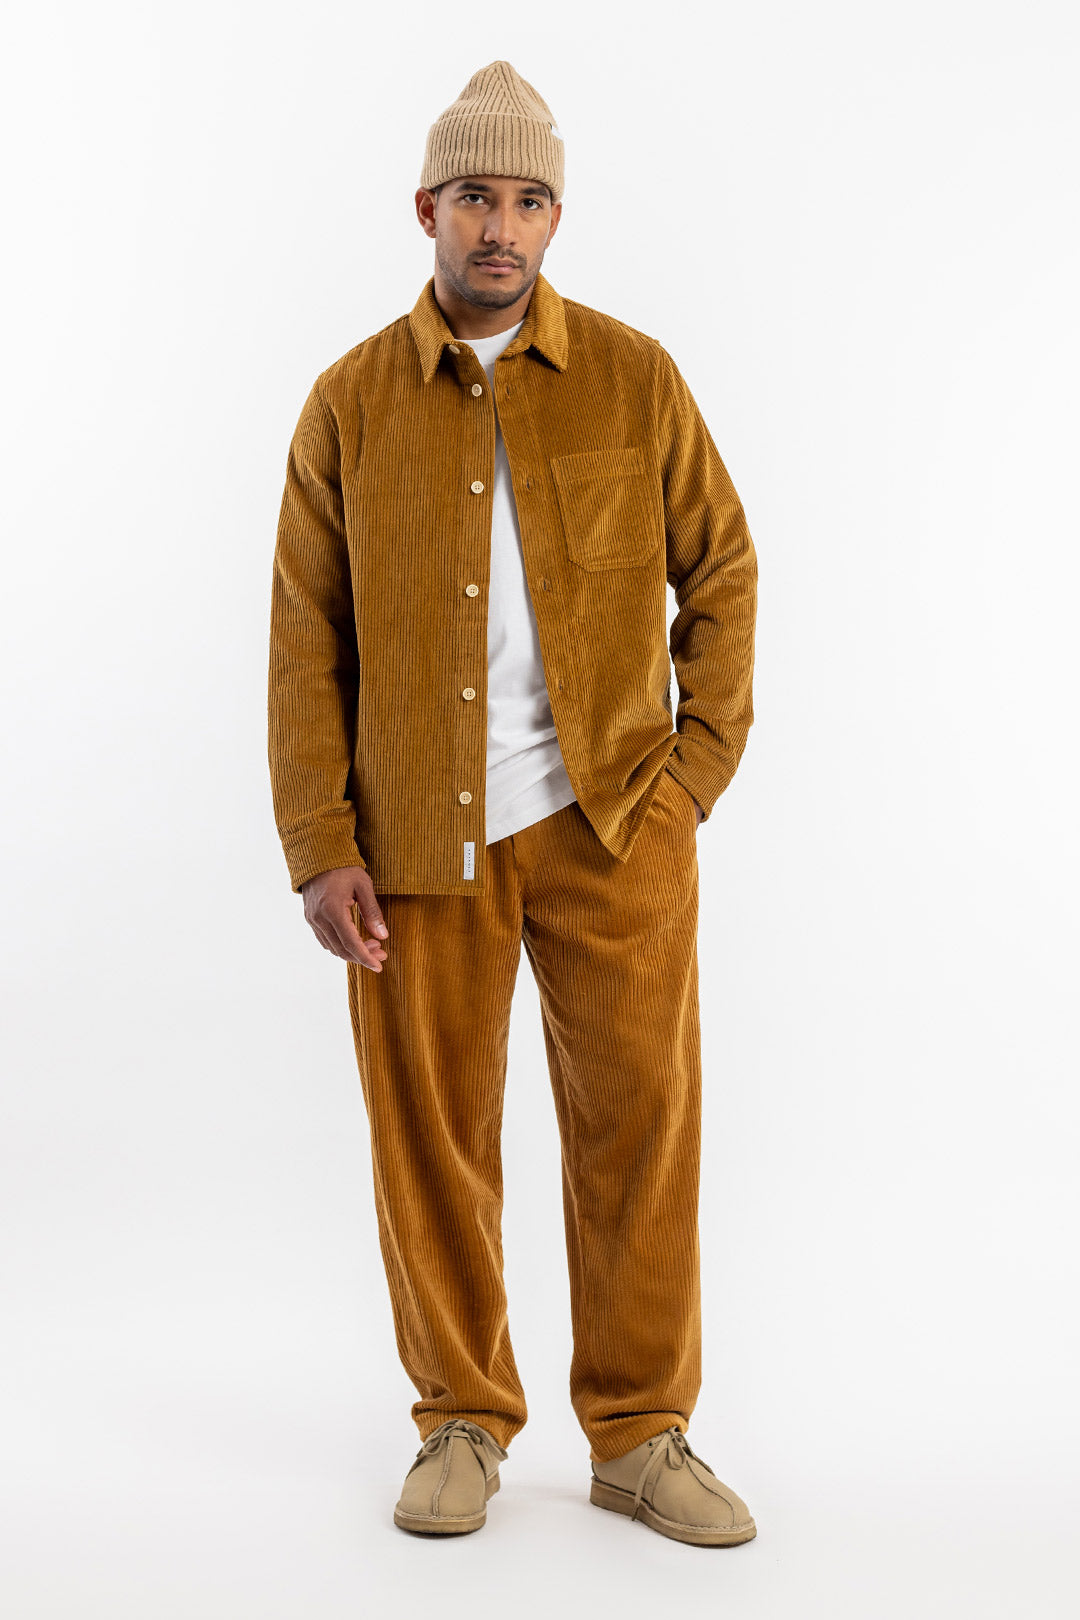 Toffee-colored corduroy trousers made from 100% organic cotton from Rotholz